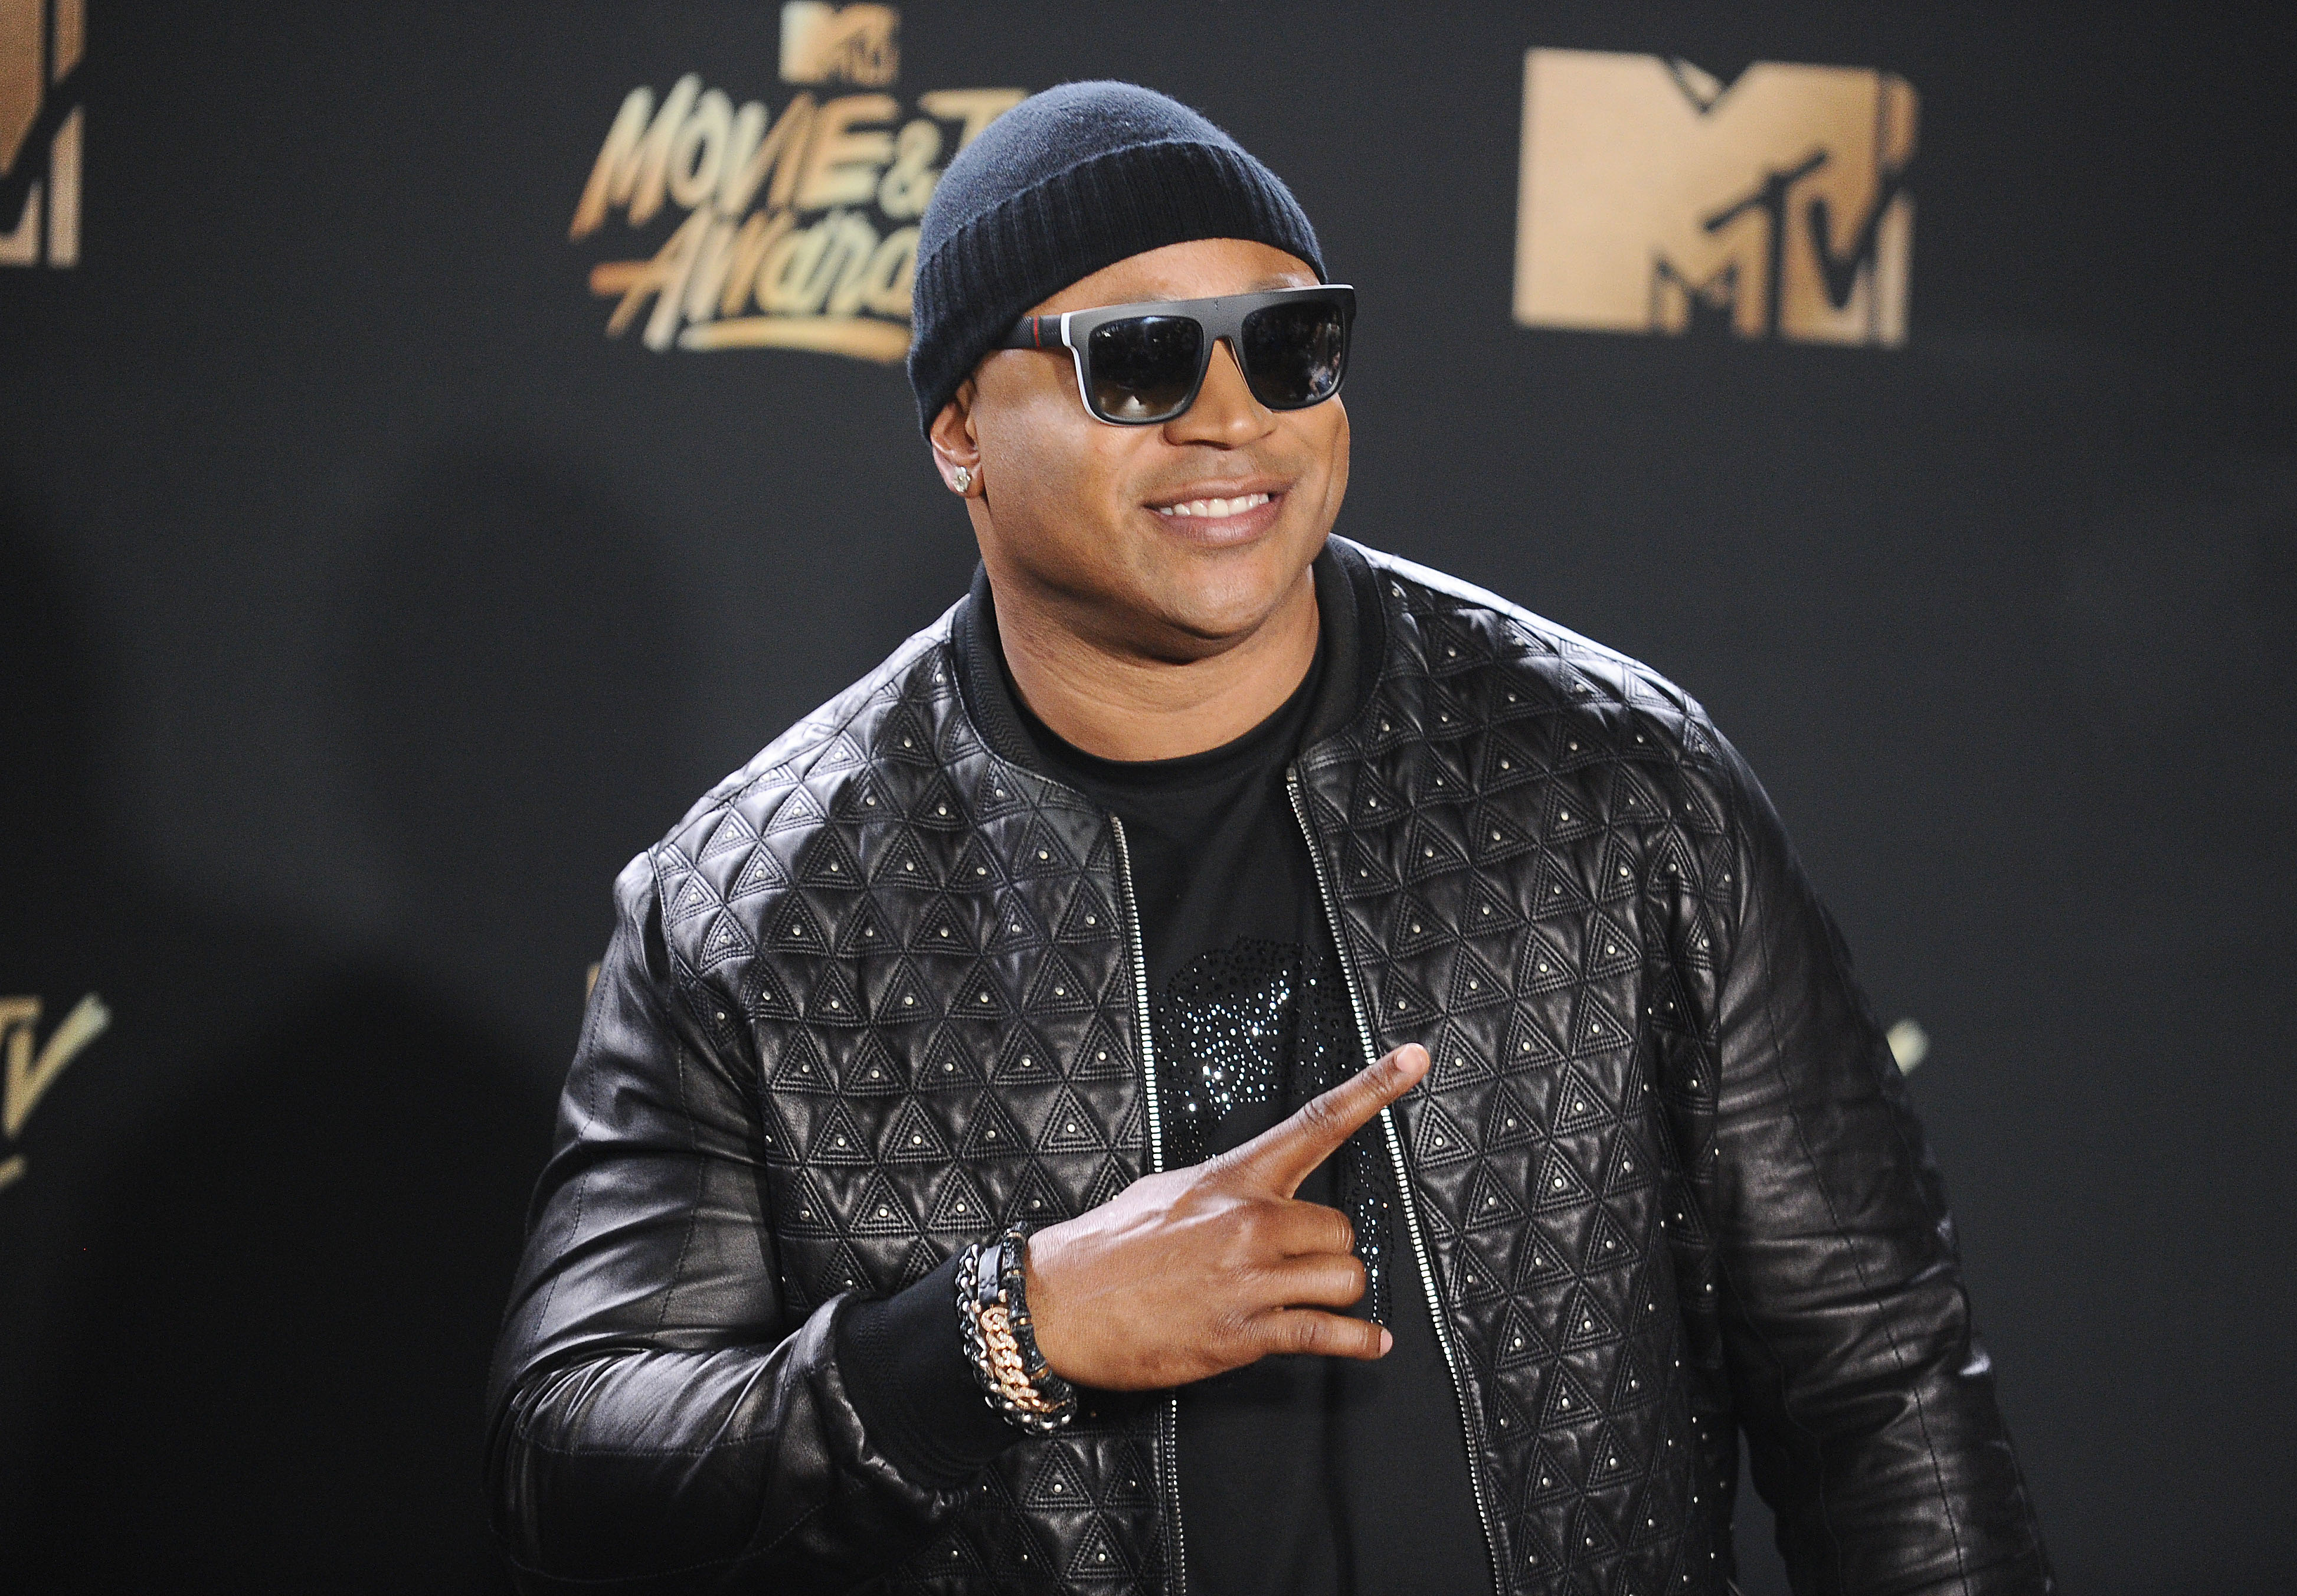  LL Cool J at the 2017 MTV Movie and TV Awards at The Shrine Auditorium on May 7, 2017.| Photo: Getty Images